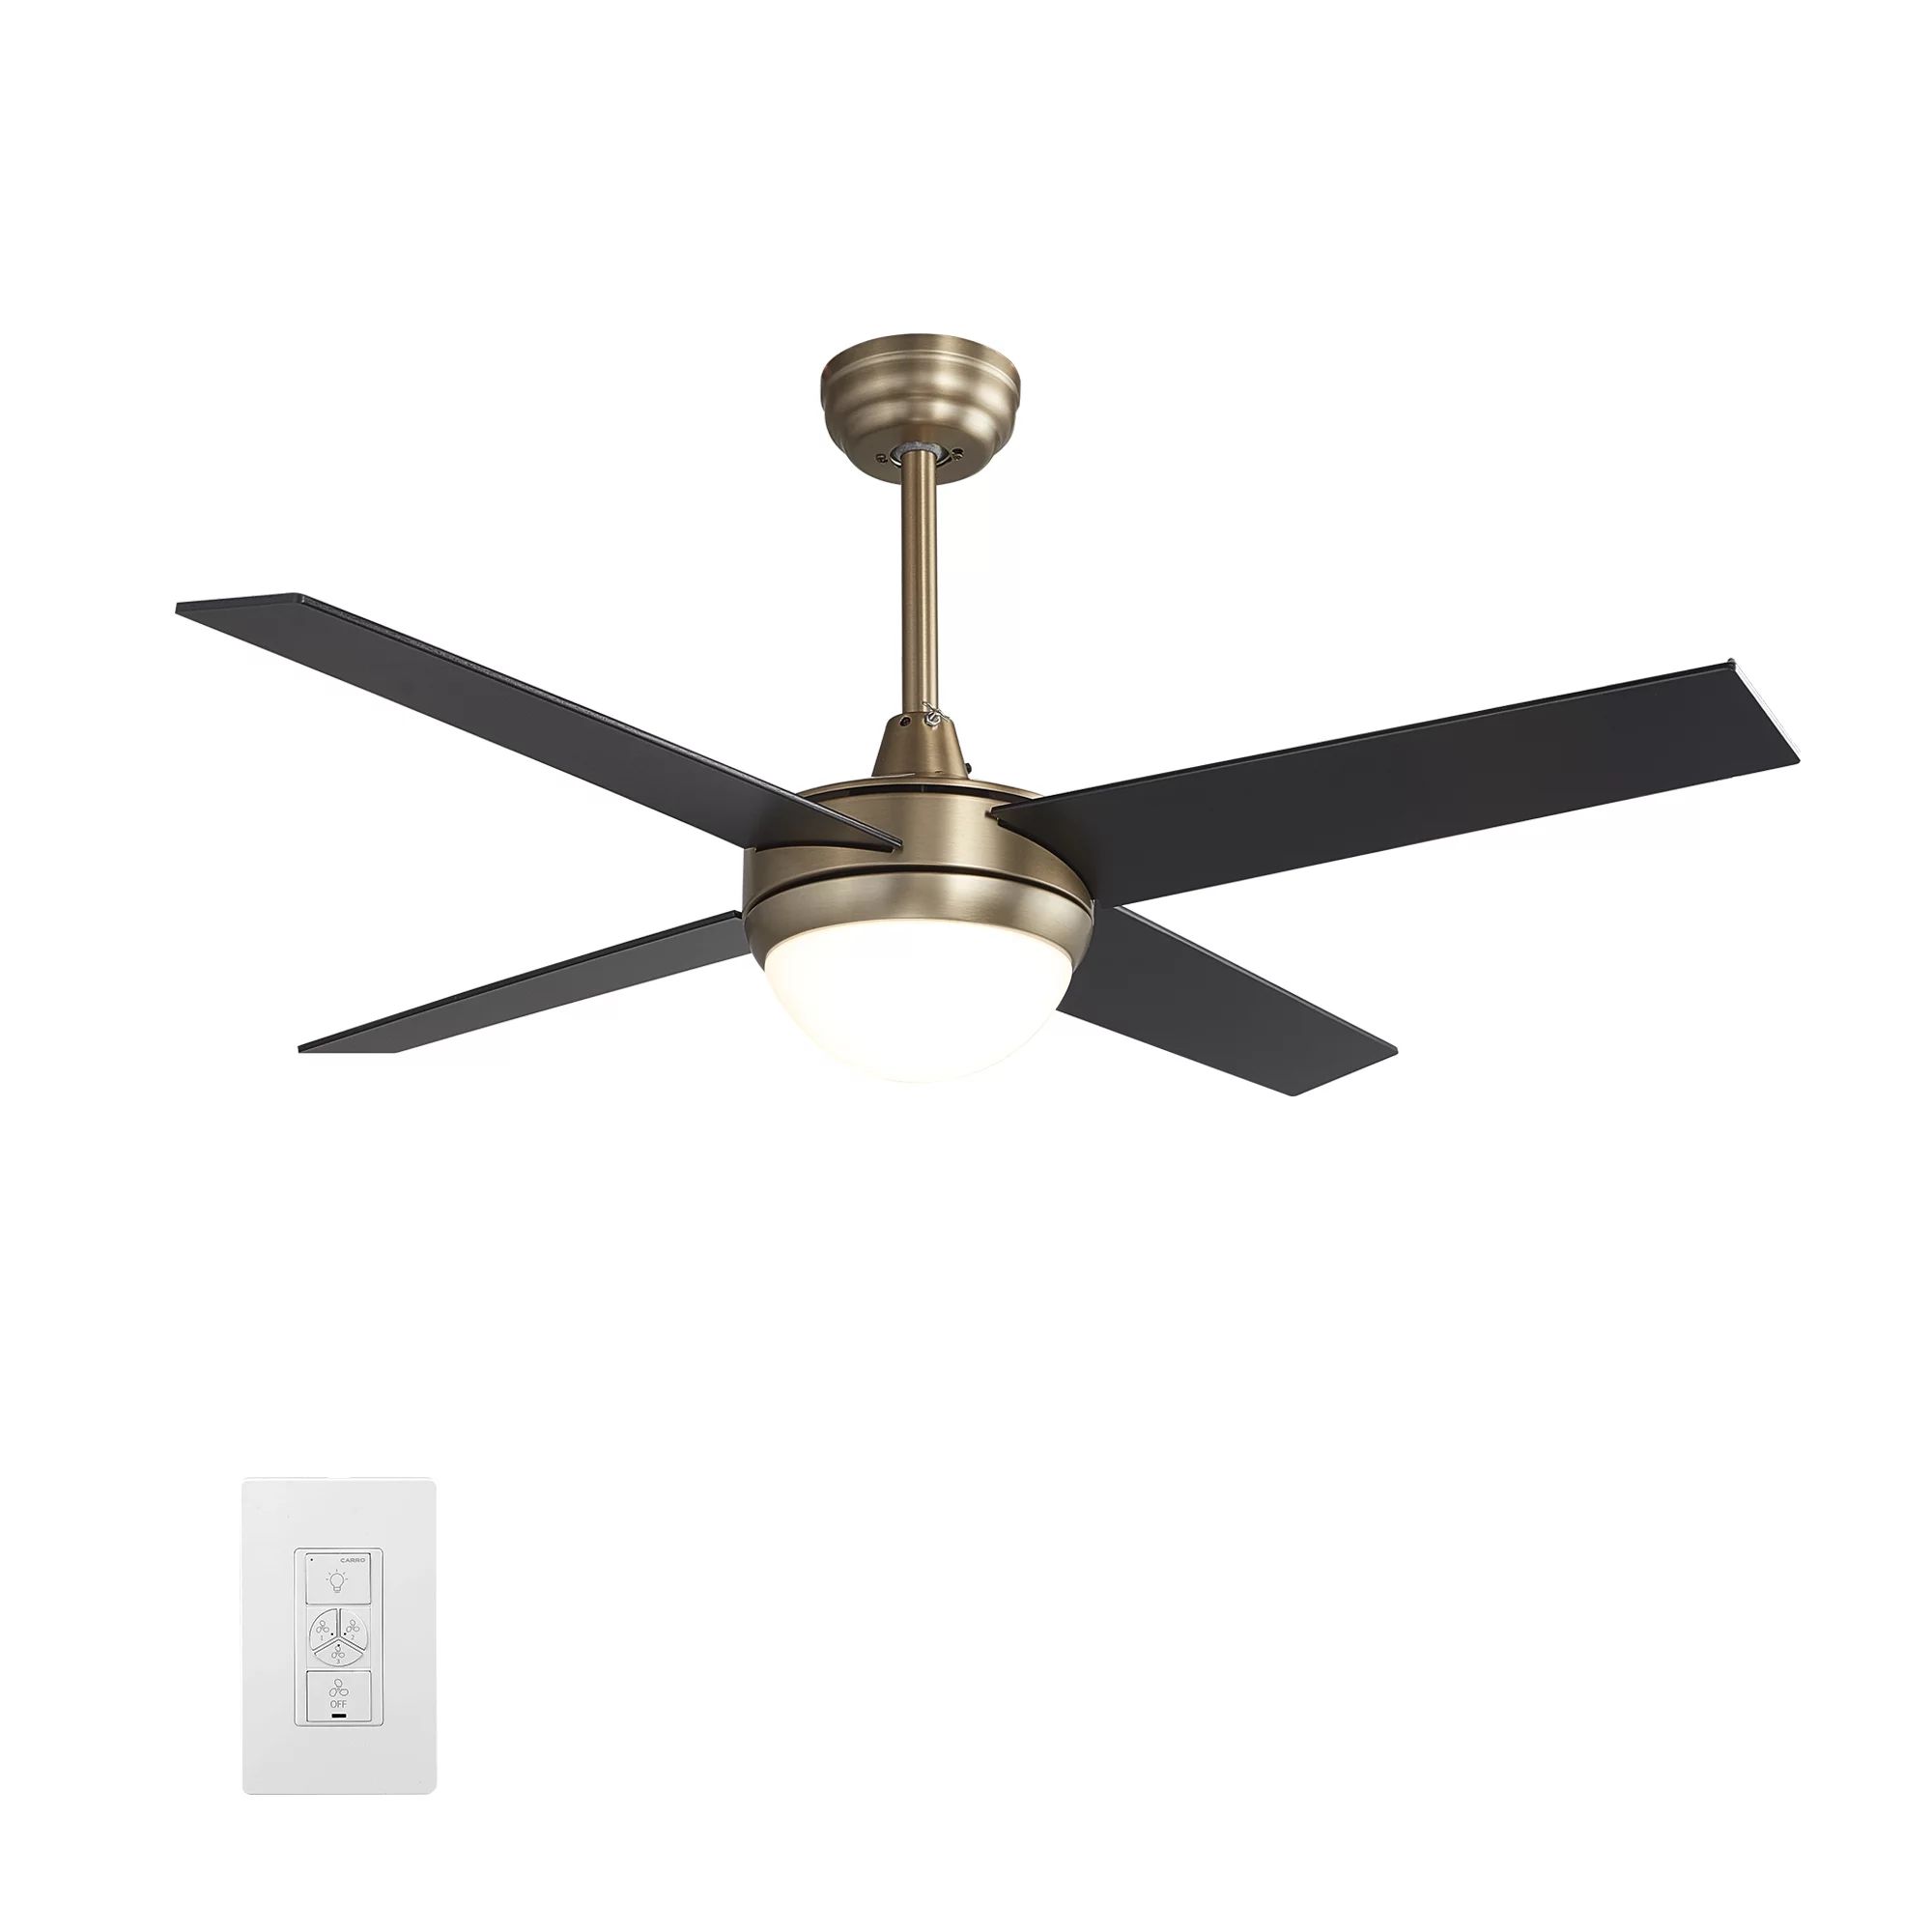 52" Black and Gold Indoor Ceiling Fan with Smart Wall Control, Light Kit | Walmart (US)